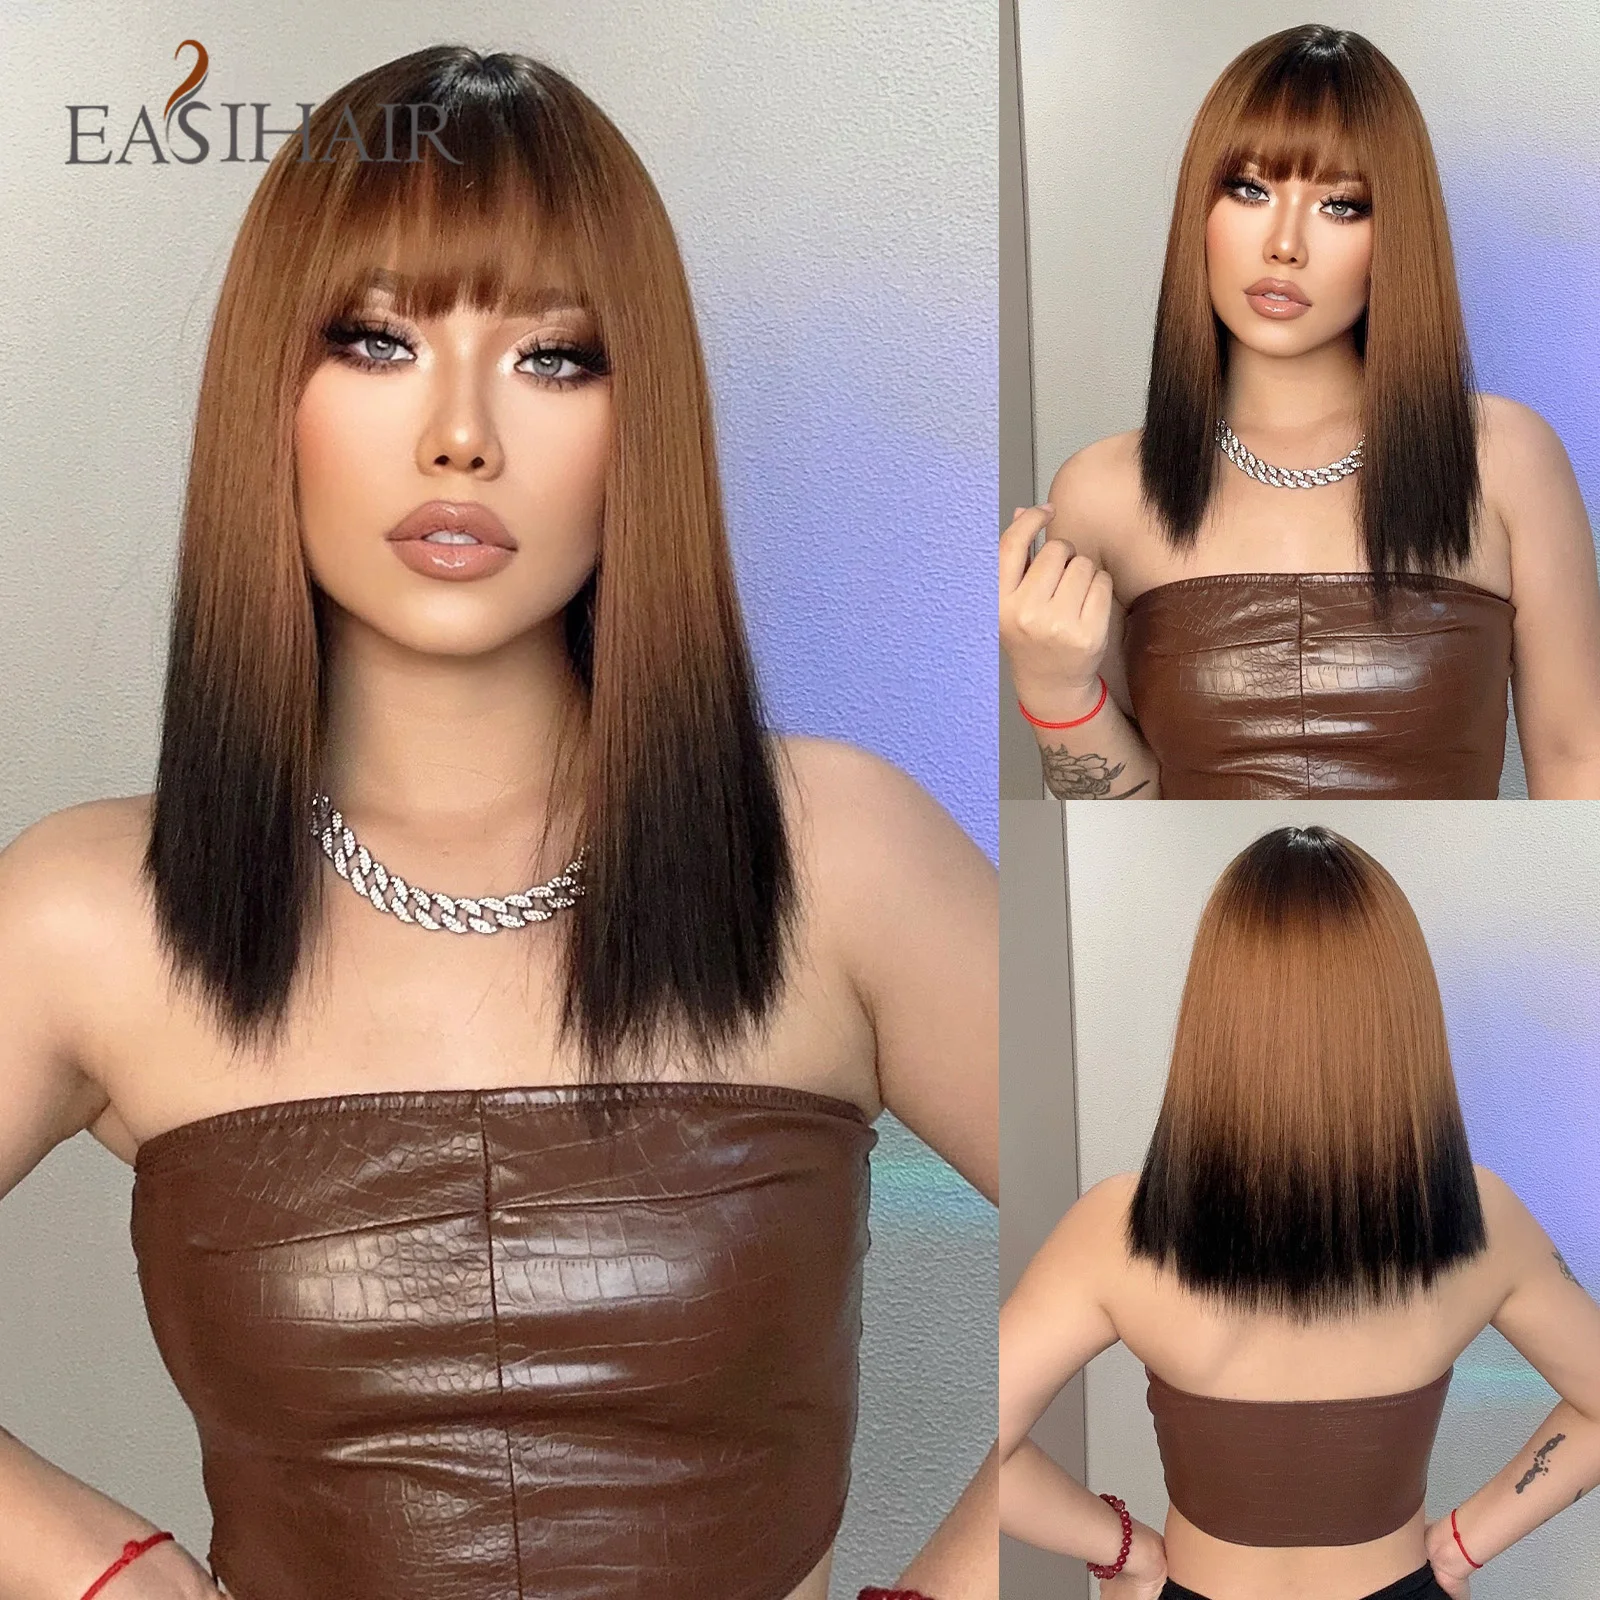 EASIHAIR Black to Brown Ombre Synthetic Wigs with Bangs Middle length Natural Hair Wigs Cosplay Hair for Women Heat Resistant